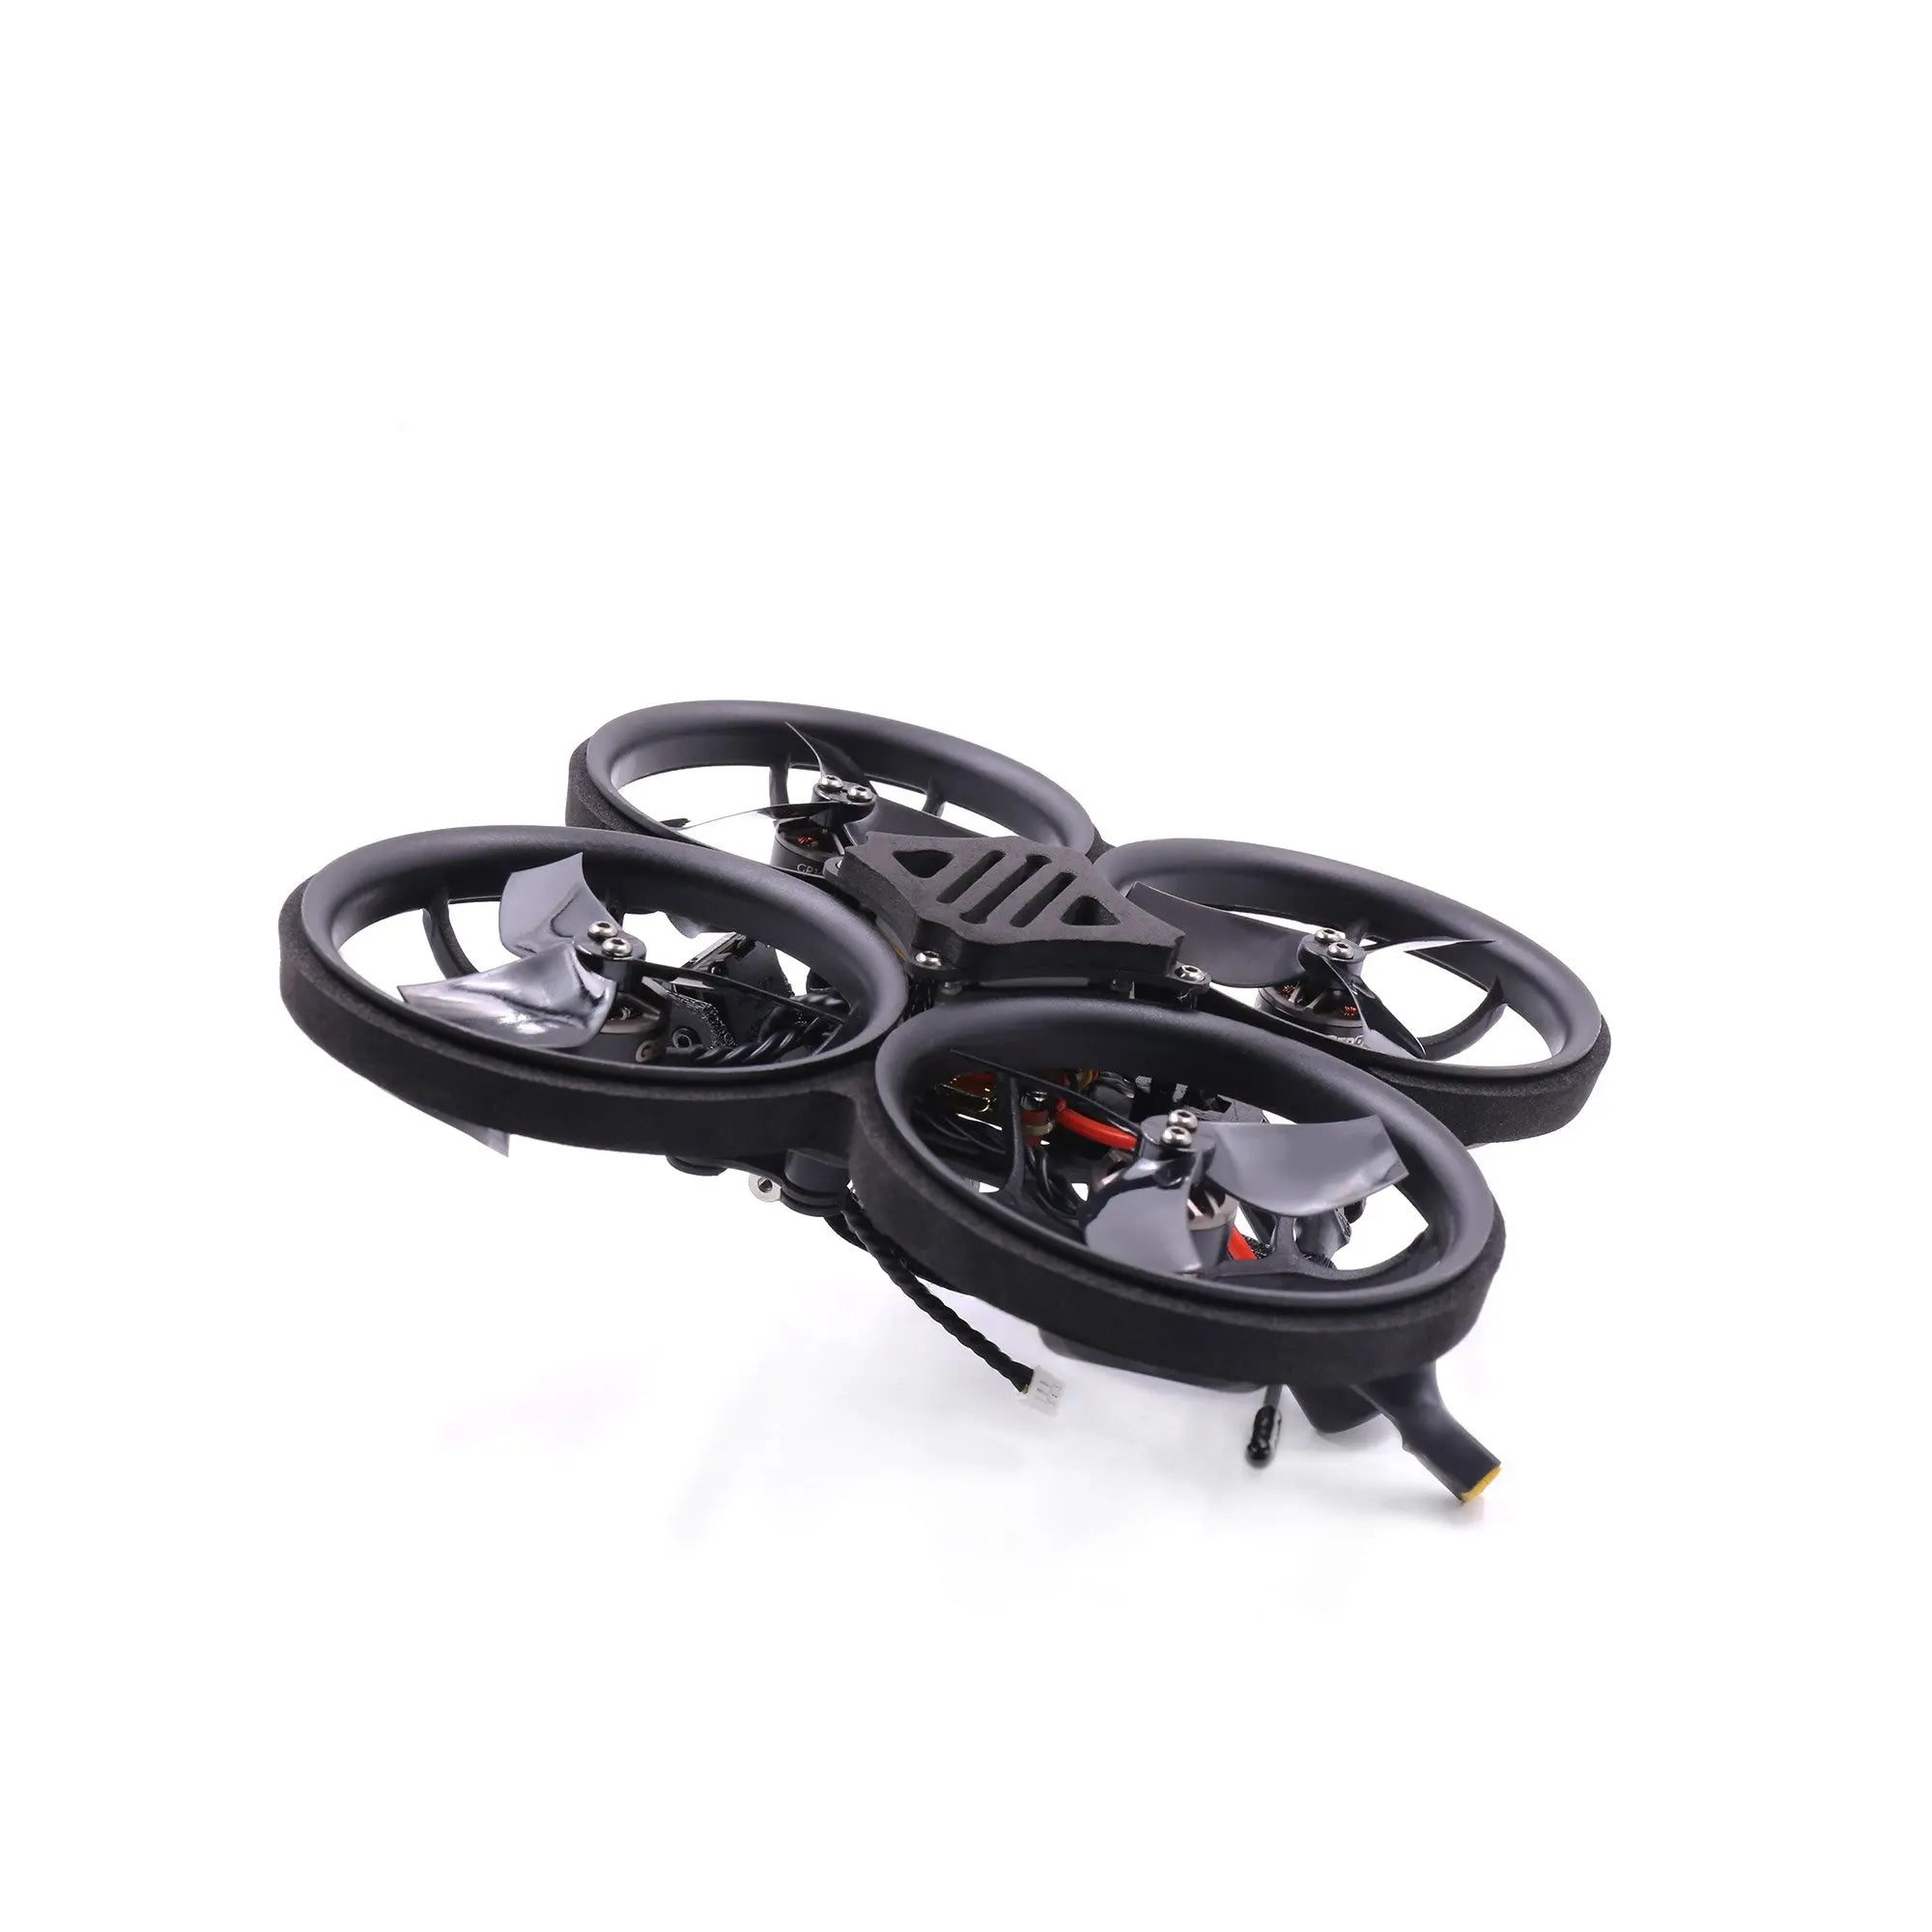 GEPRC CineLog25 HD CineWhoop Racing Drone, this allows for direct control of the camera's power on/off function via the remote controller